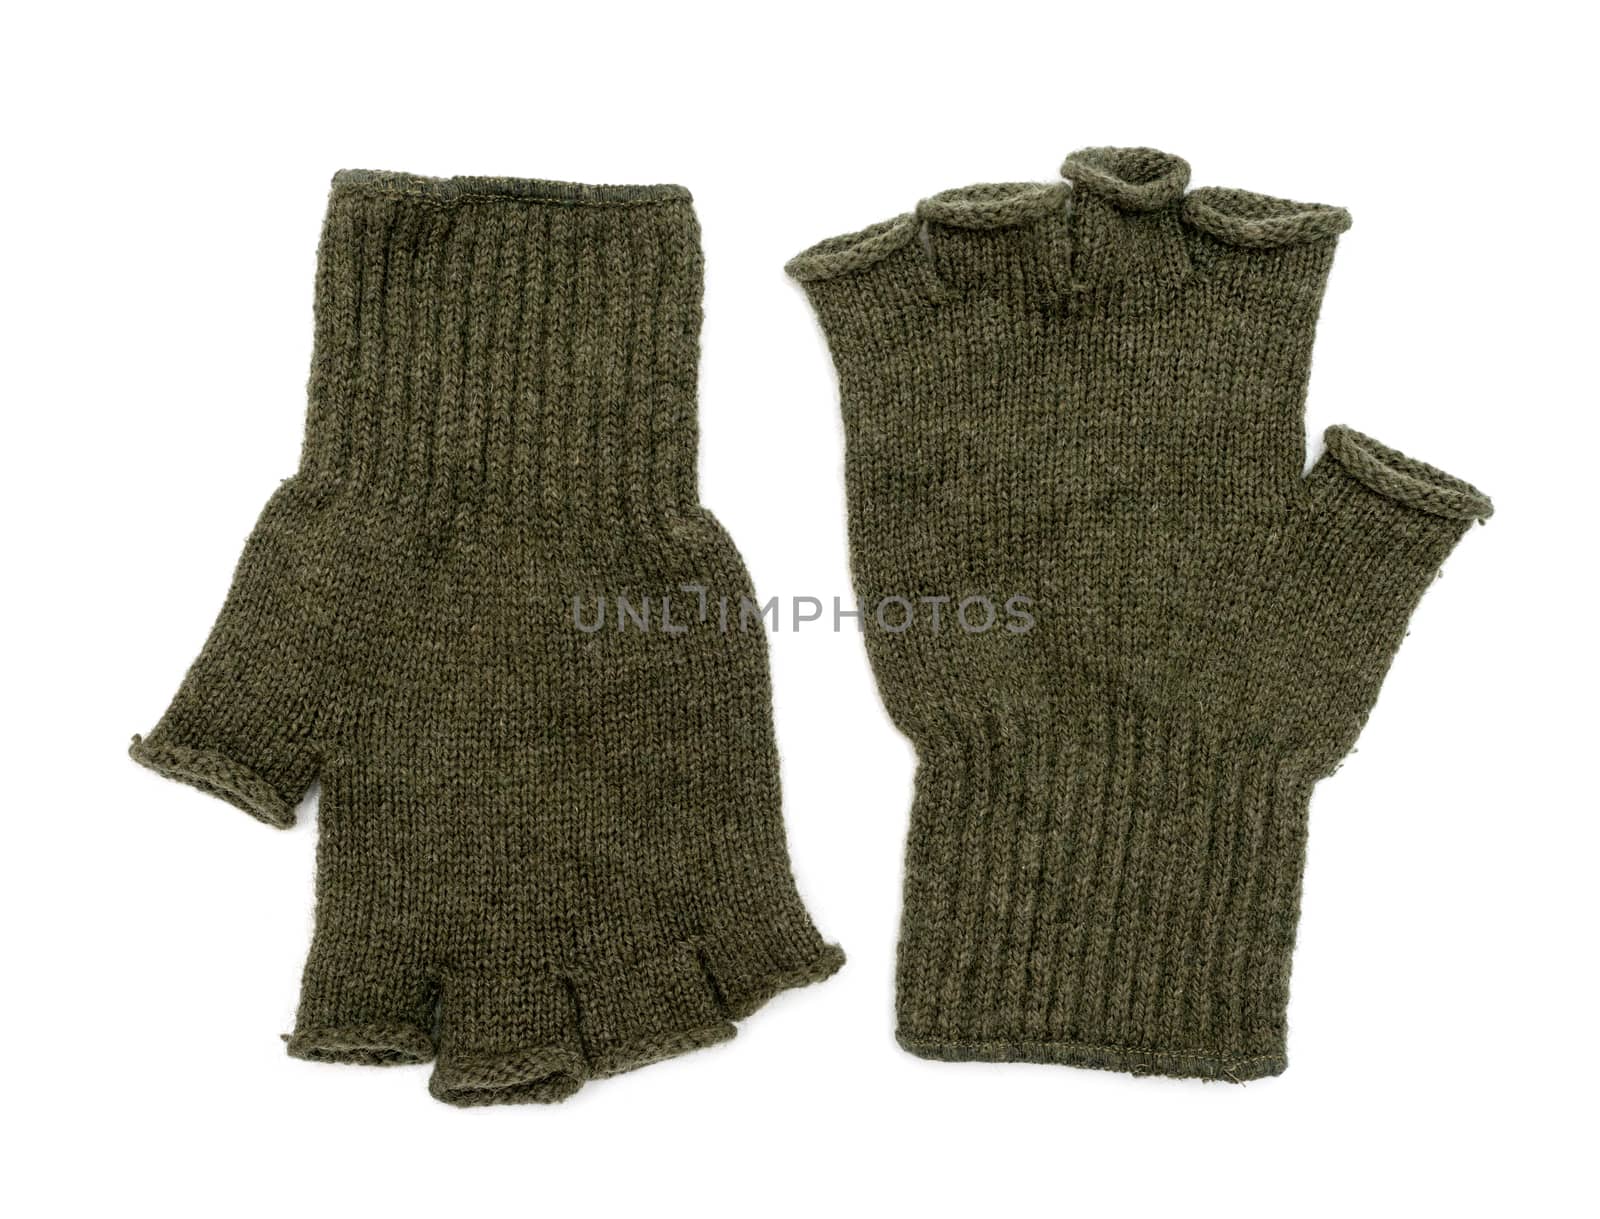 New Green Knit Wool Gloves isolated on white background